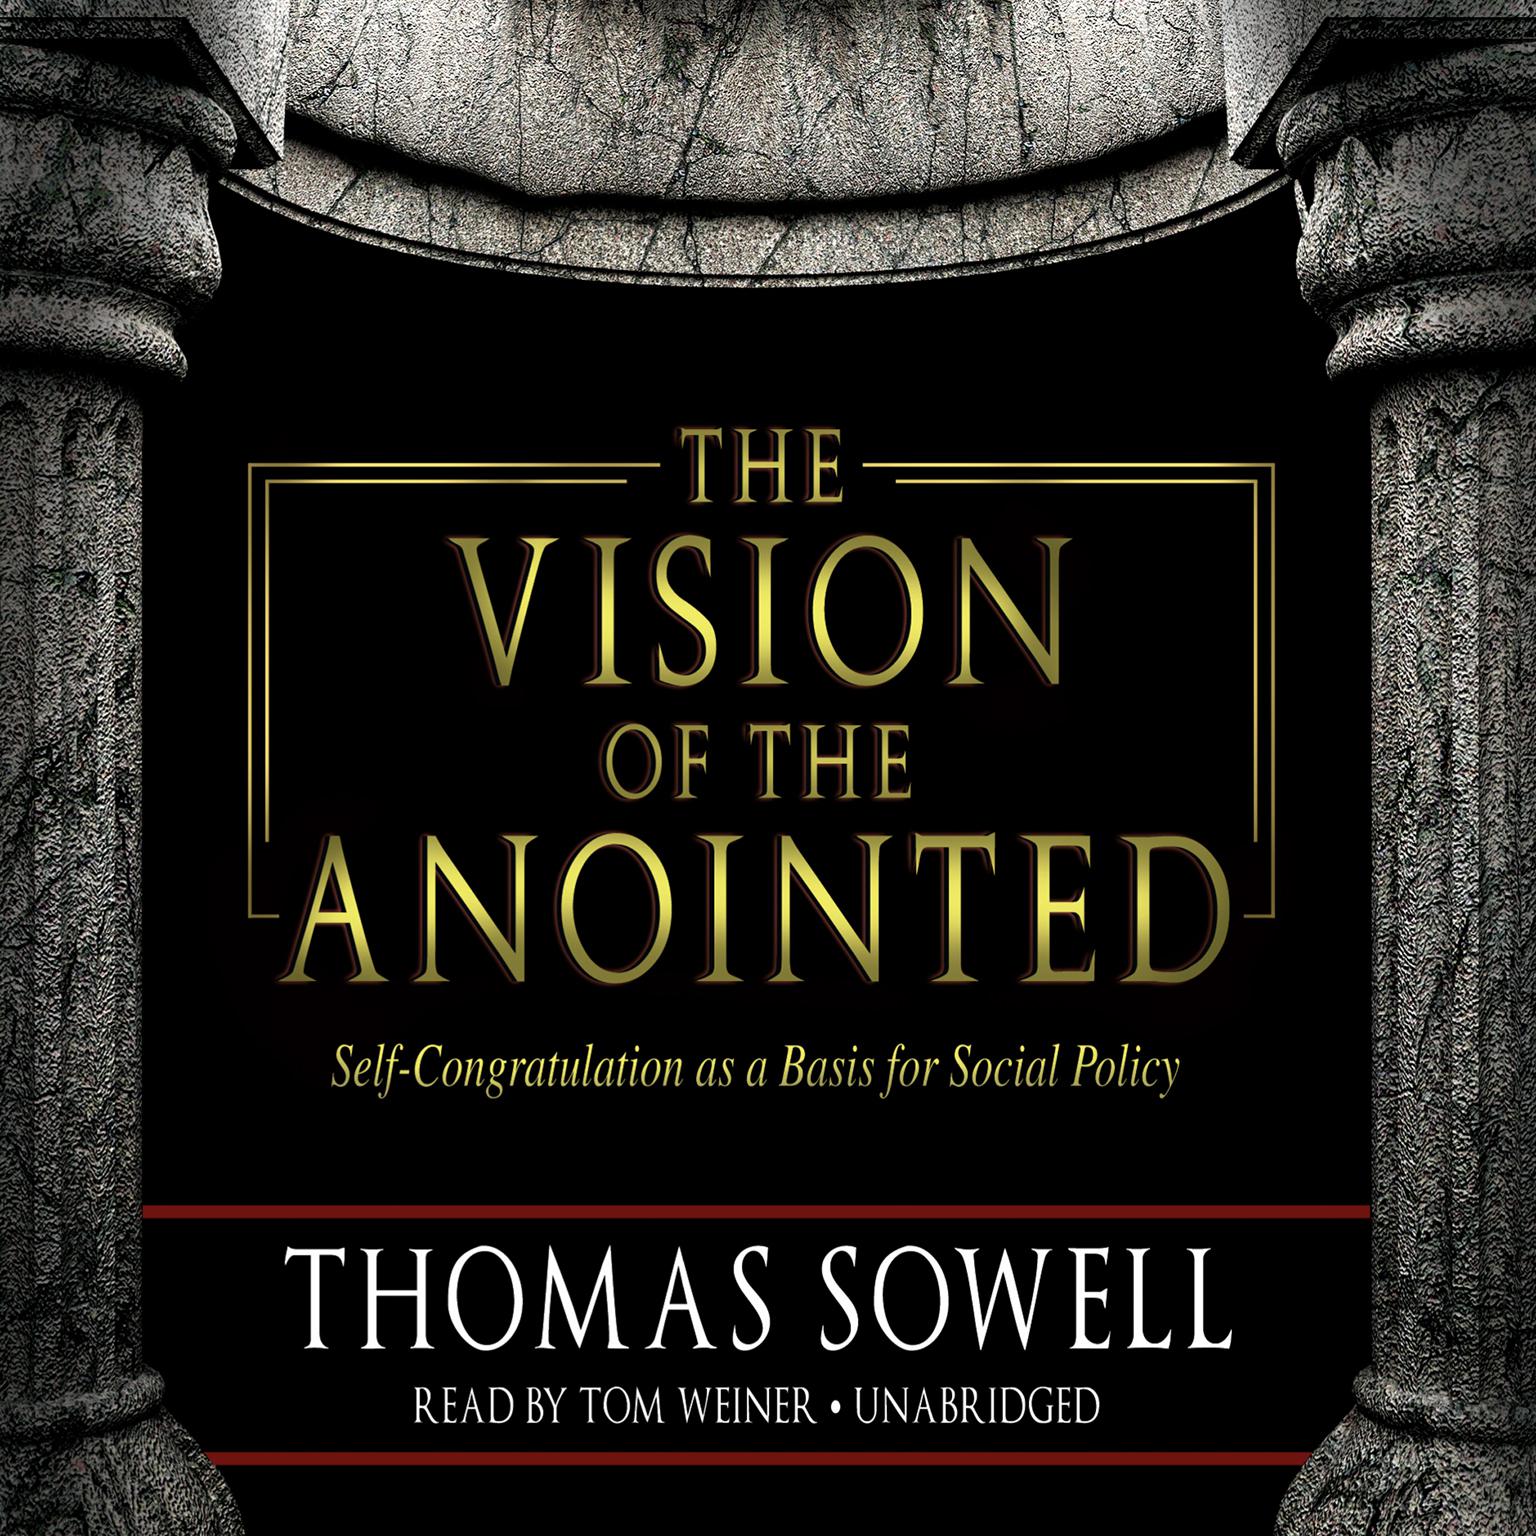 The Vision of the Anointed: Self-Congratulation as a Basis for Social Policy Audiobook, by Thomas Sowell